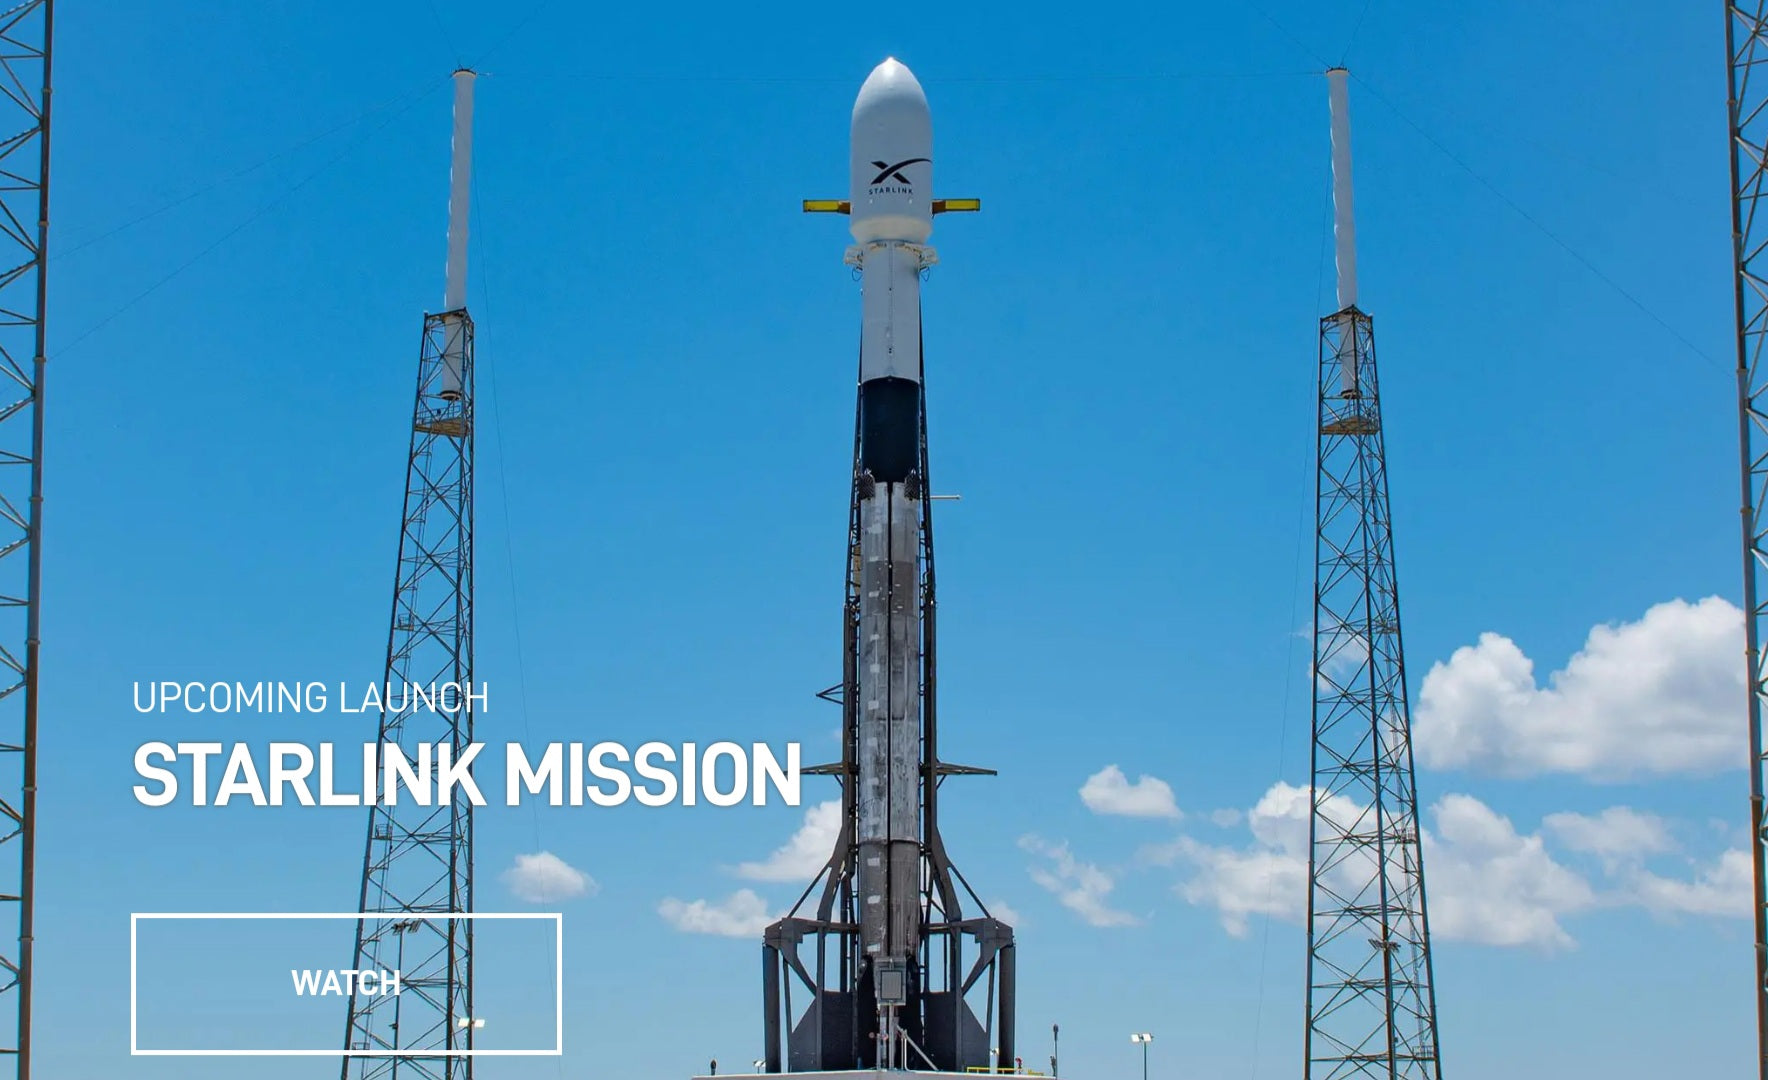 SpaceX plans to launch back-to-back Starlink missions –Watch It Live!